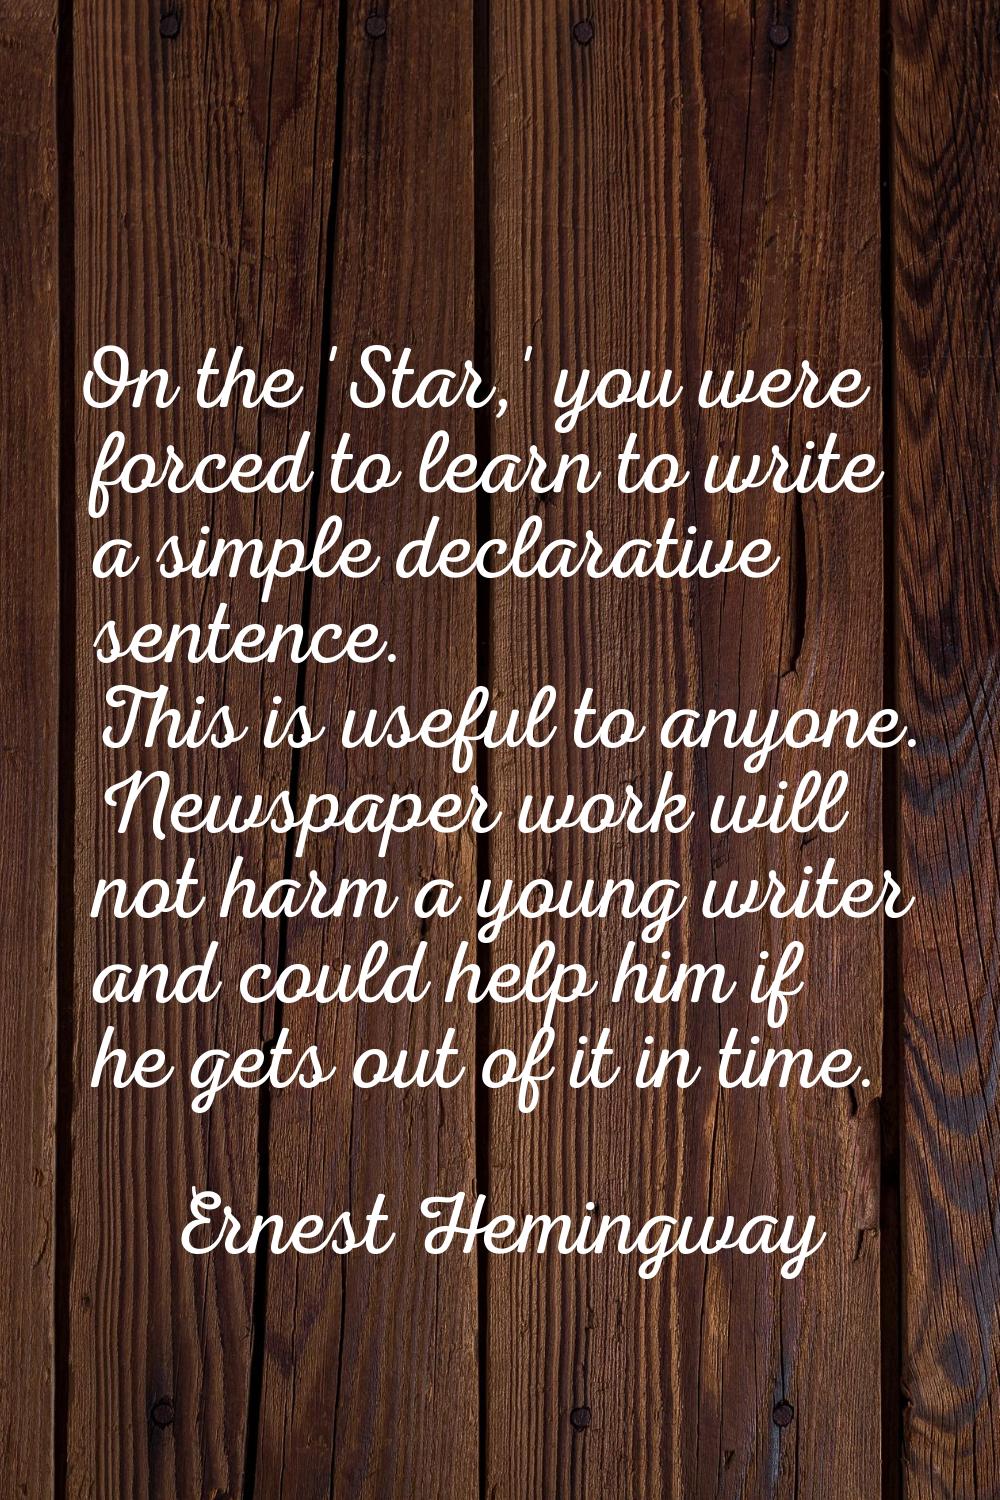 On the 'Star,' you were forced to learn to write a simple declarative sentence. This is useful to a